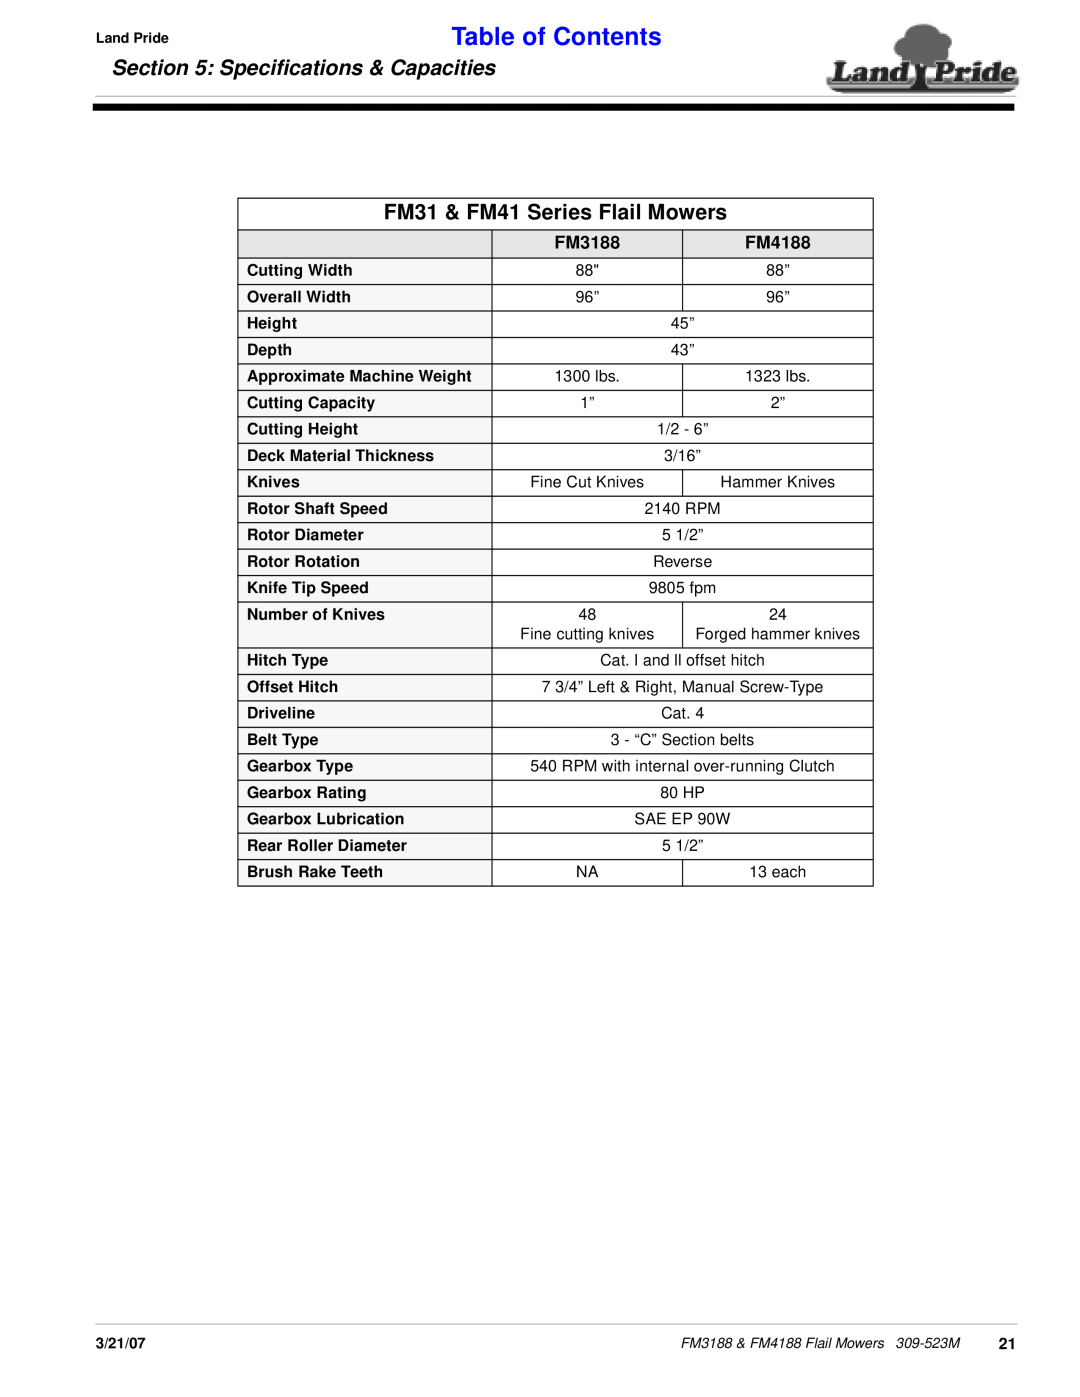 Land Pride FM3188 manual Speciﬁcations & Capacities, Table of Contents, FM31 & FM41 Series Flail Mowers, FM4188 